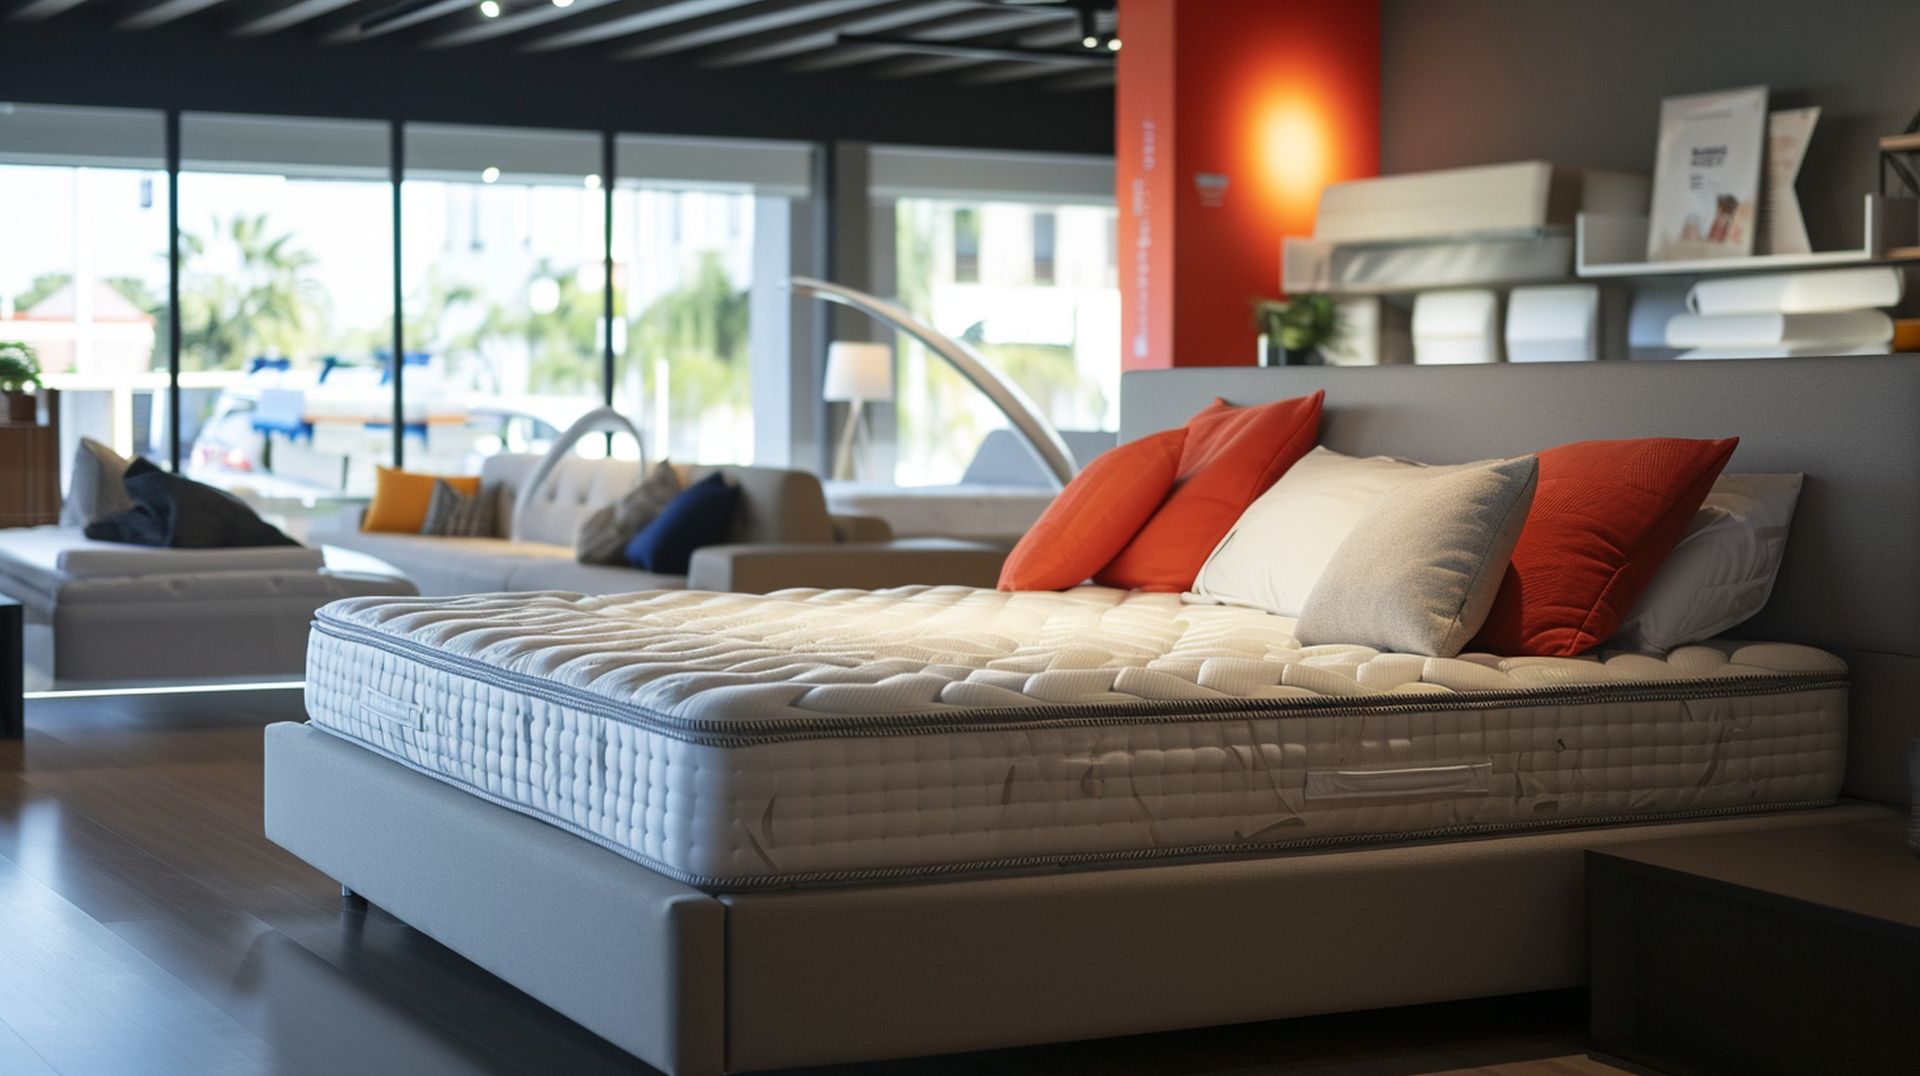 If you're looking for a new bed, mattress stores in Diamond Bar offer the best customer and delivery service, financing, and warranties in California